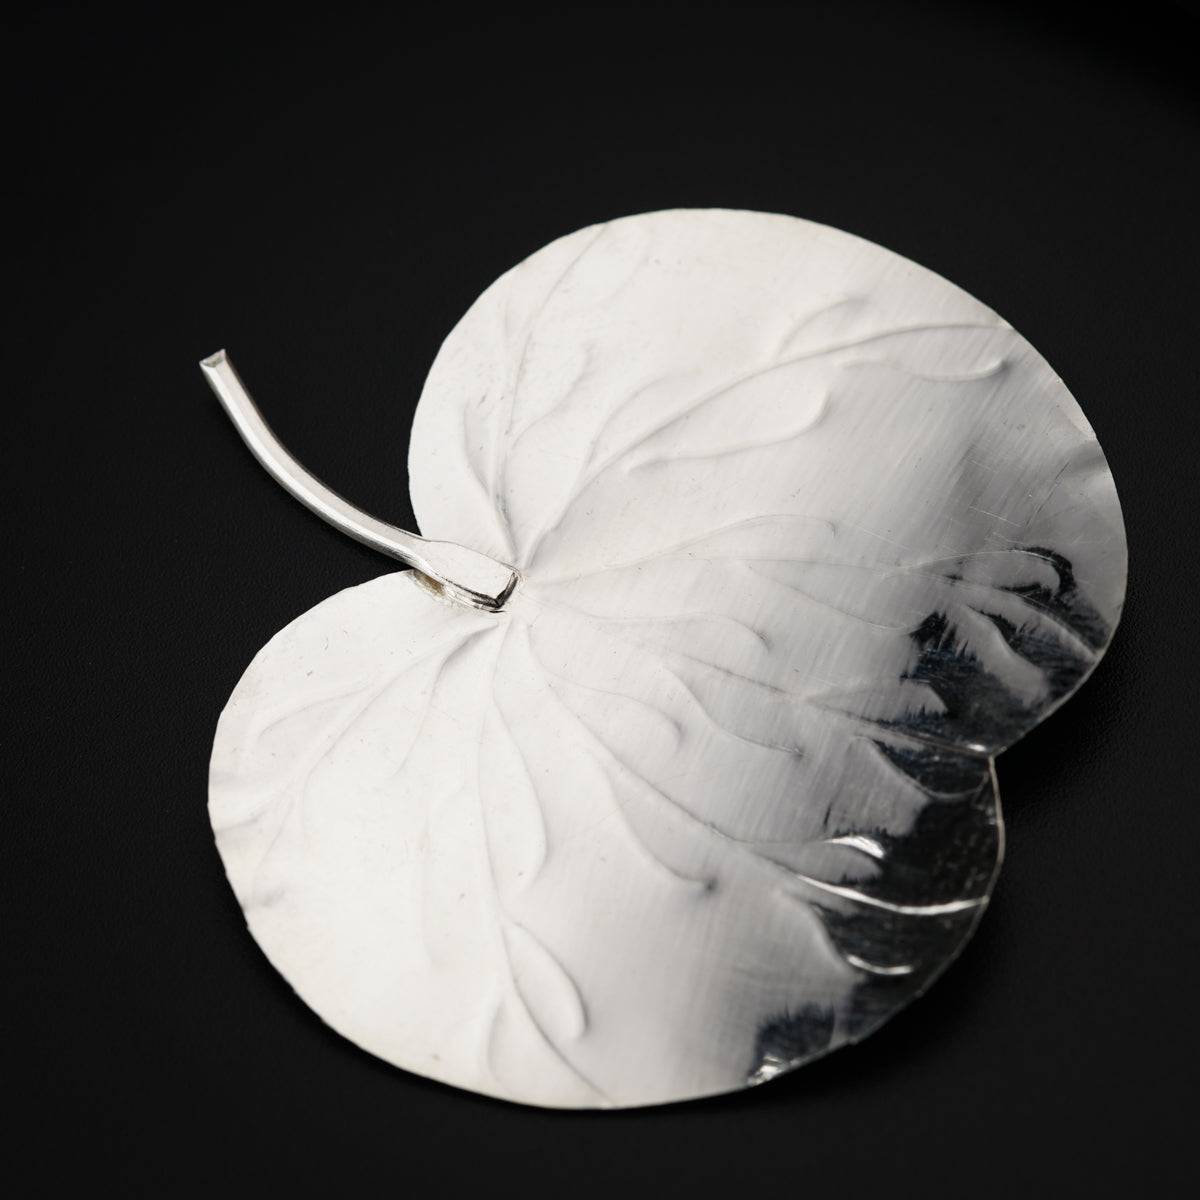 a silver plate with a leaf on it